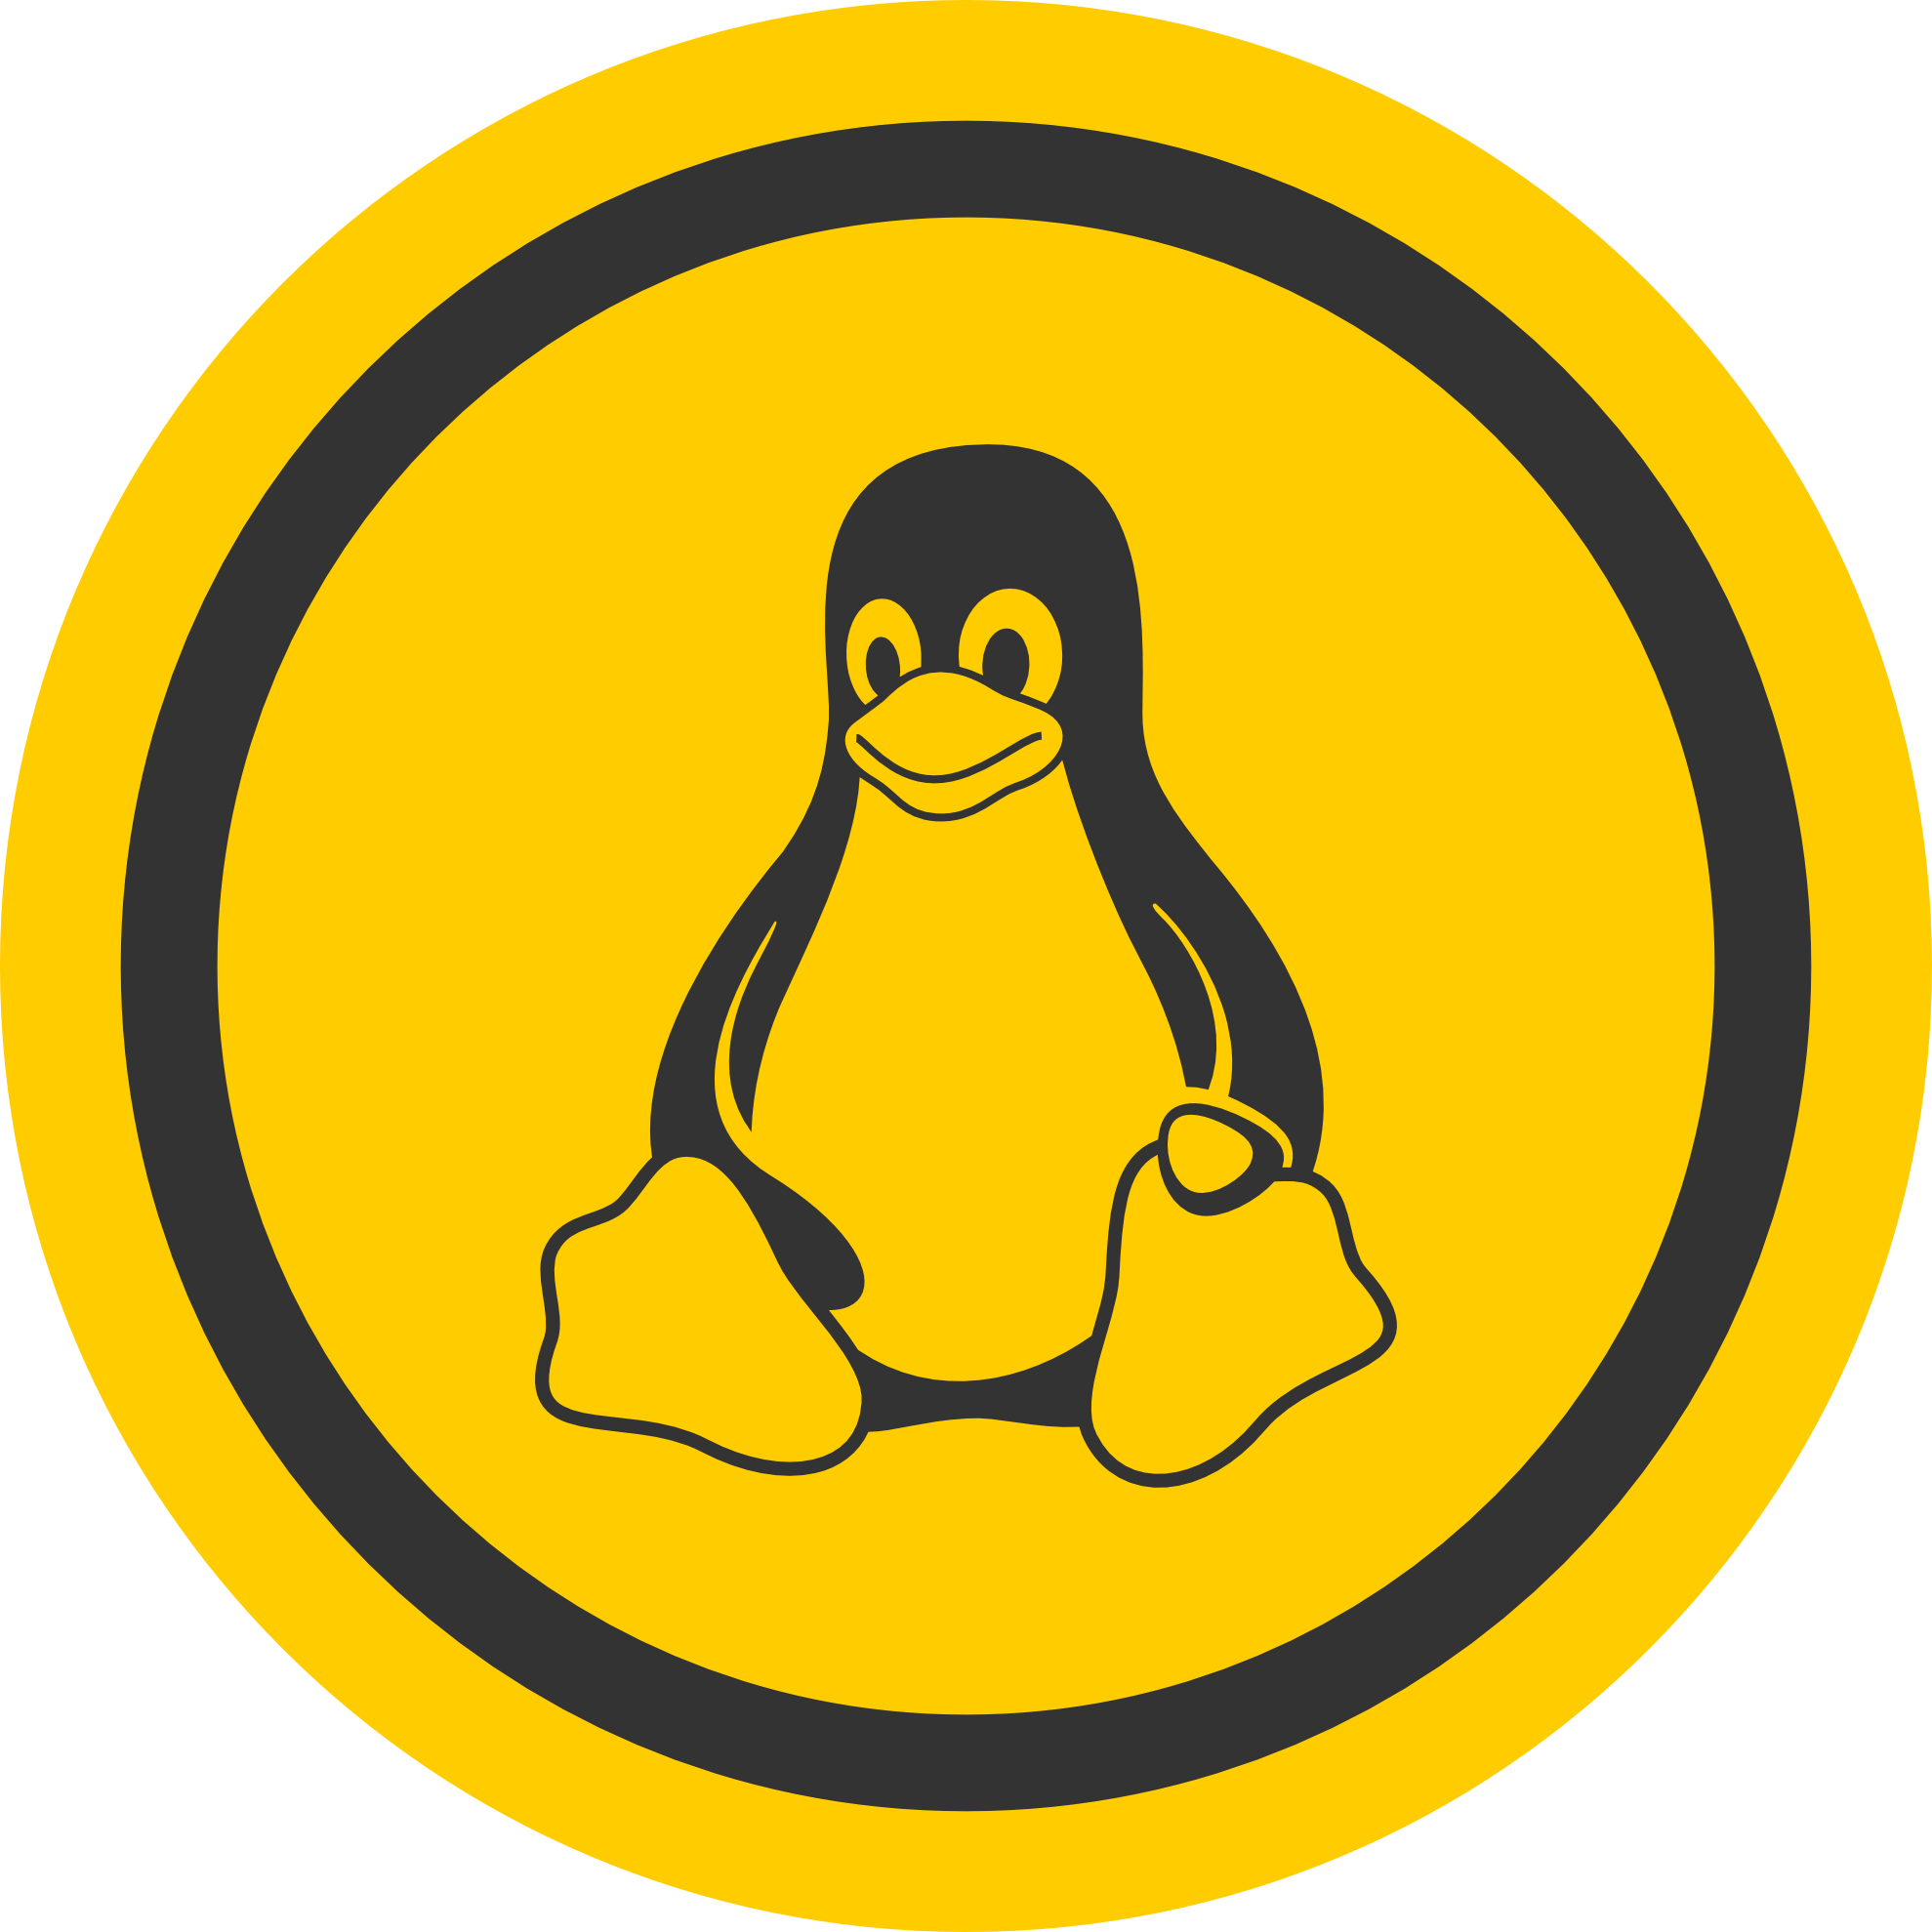 Tux Logo Operating System Linux Free Download Image PNG Image